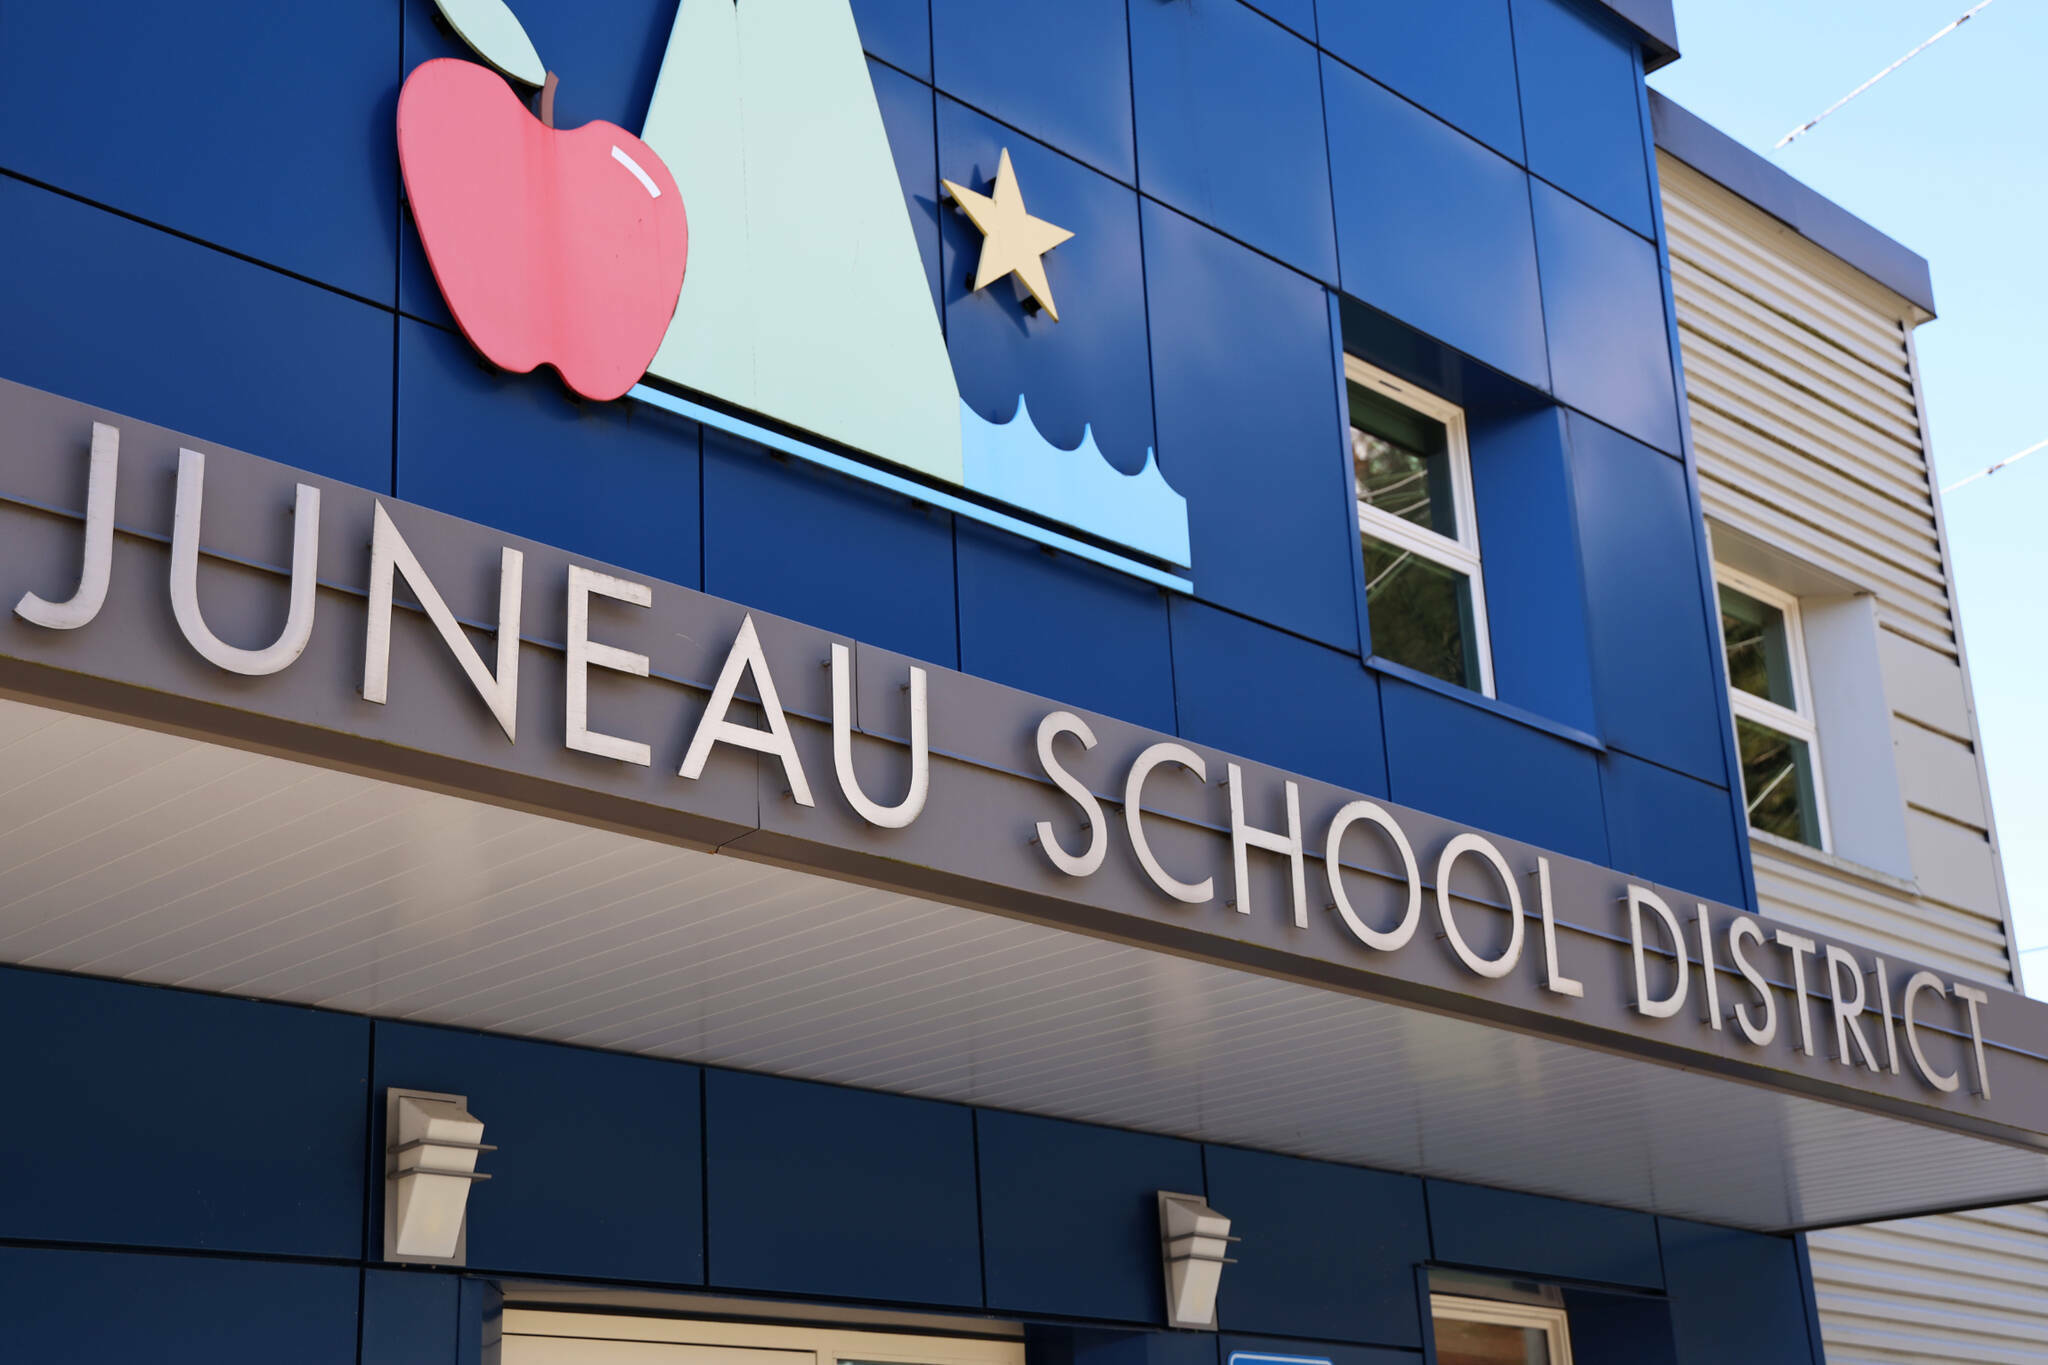 The Juneau School District is facing a deficit of more than $9.5 million for the current fiscal year, according a district report published Jan. 5. (Clarise Larson / Juneau Empire file photo)